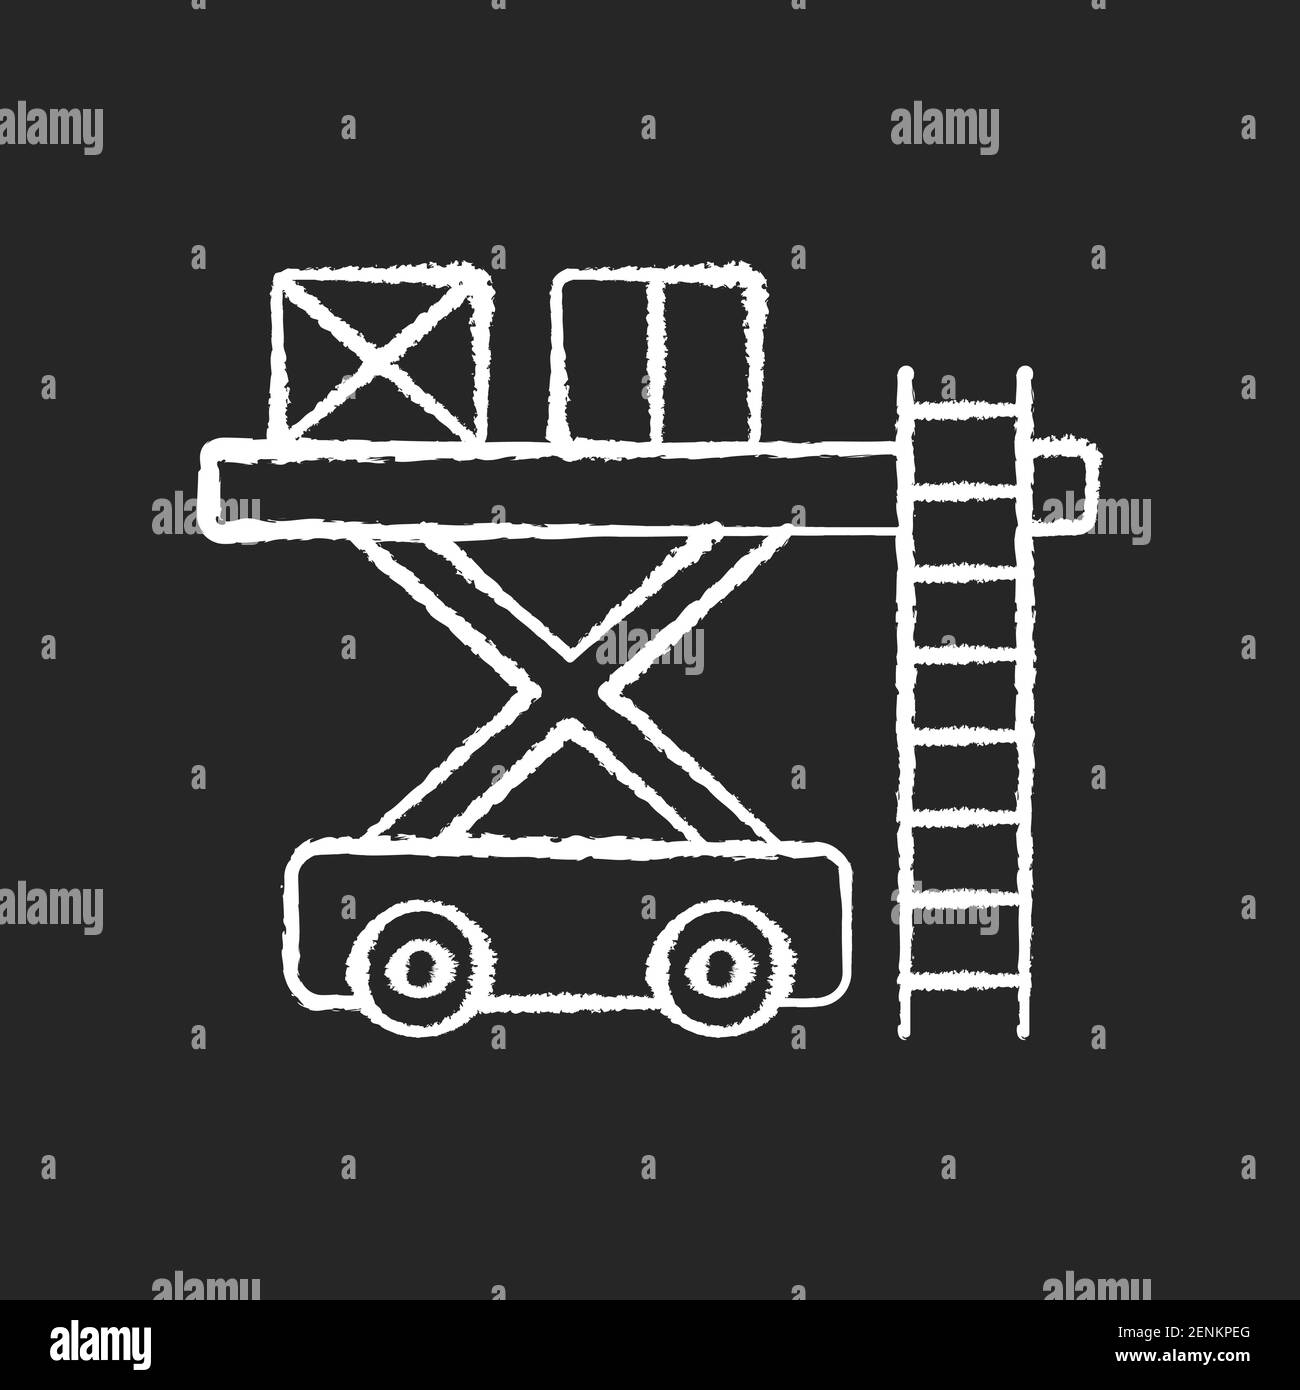 Ramp services chalk white icon on black background Stock Vector